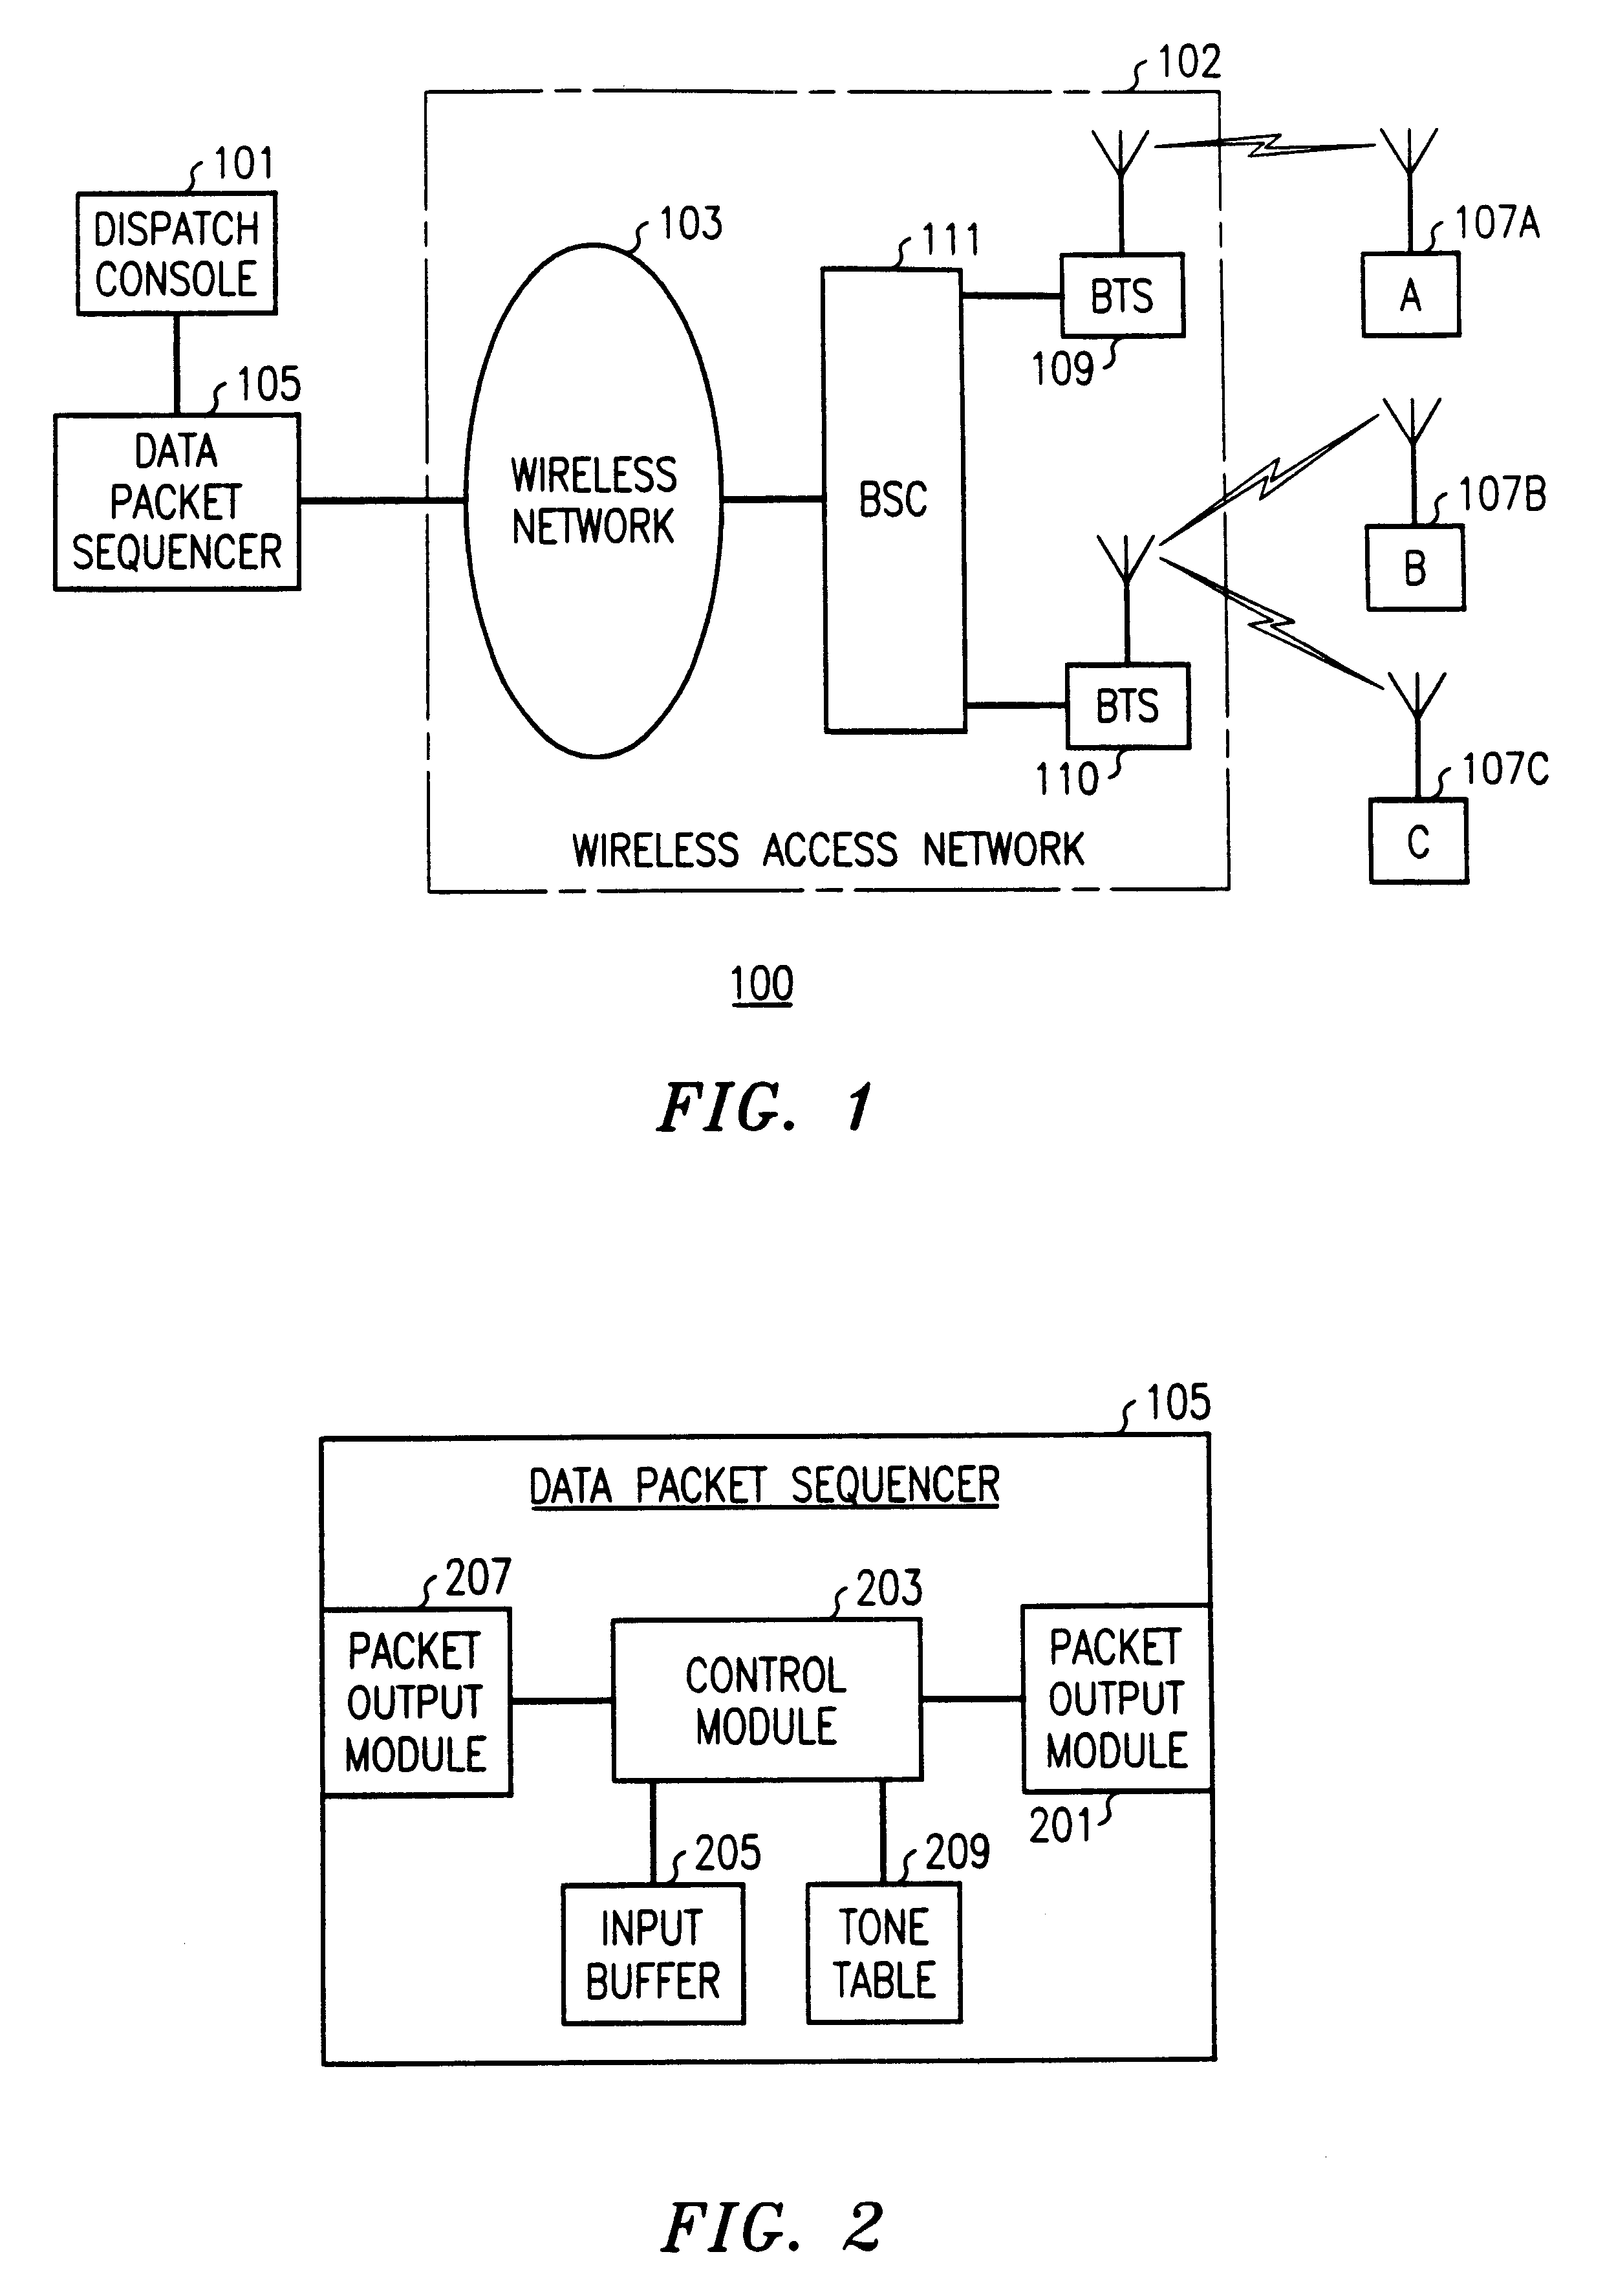 Method and apparatus for re-sequencing data packets